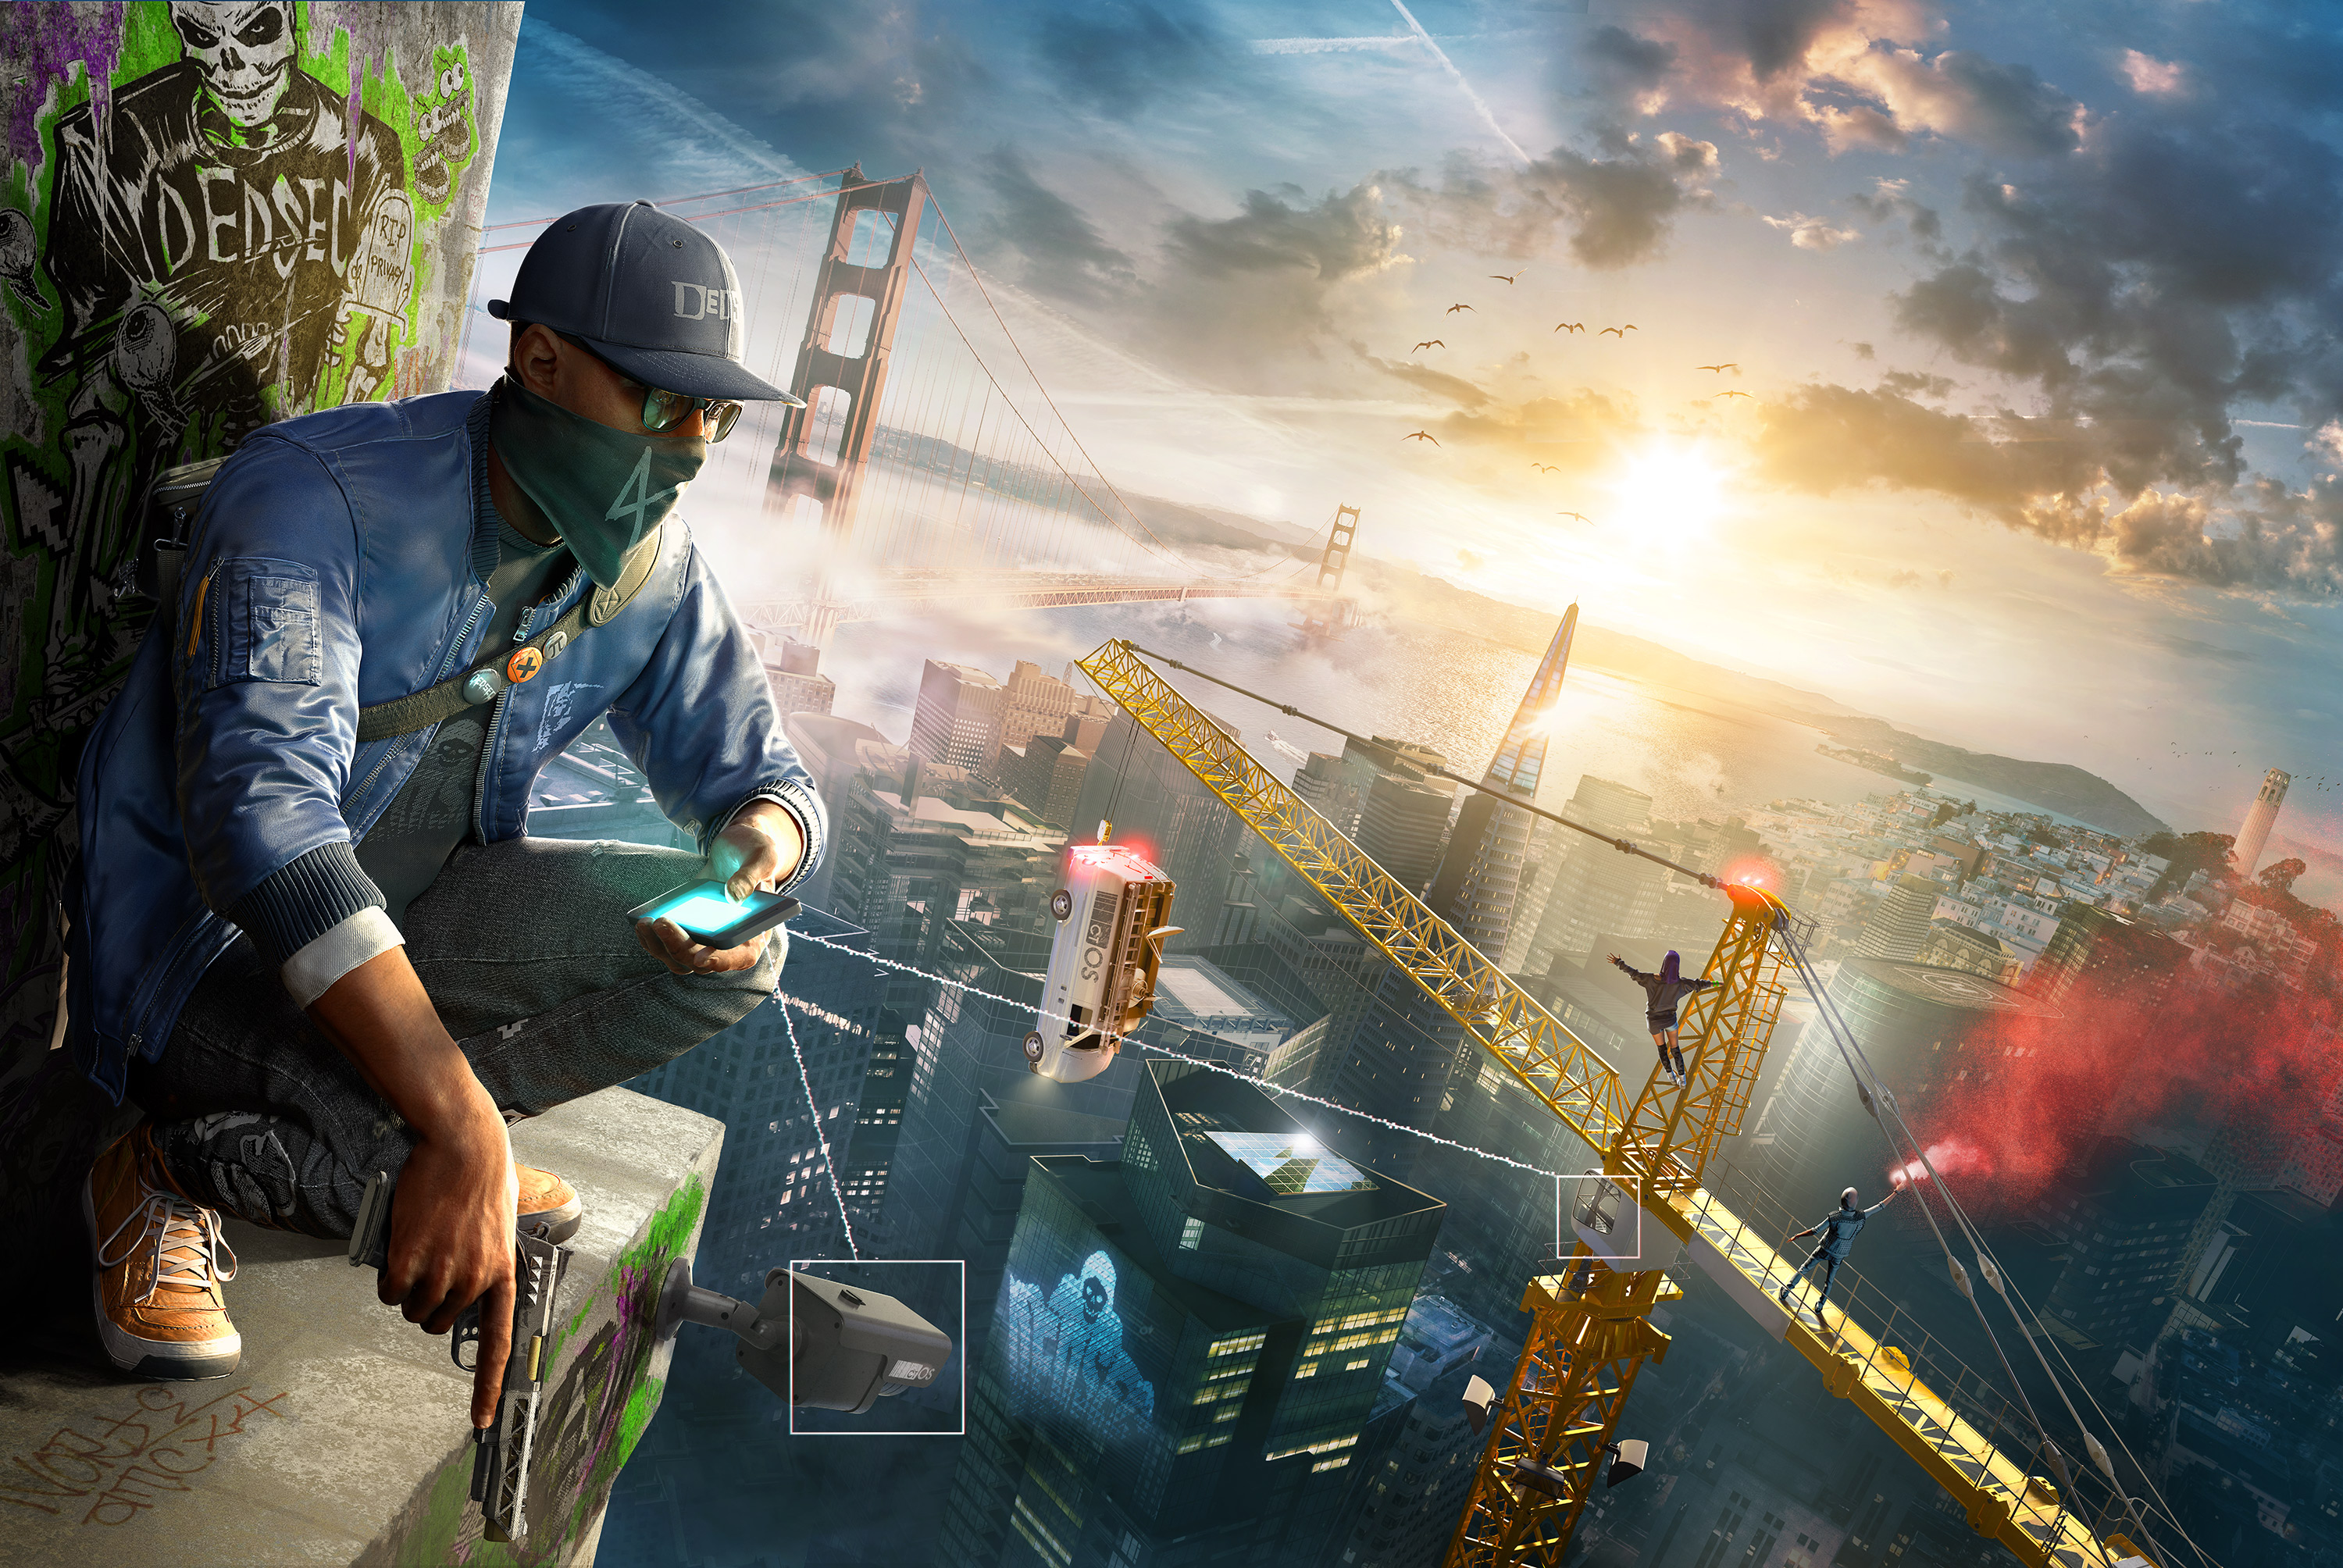 watch dogs 2, watch dogs, video game HD wallpaper